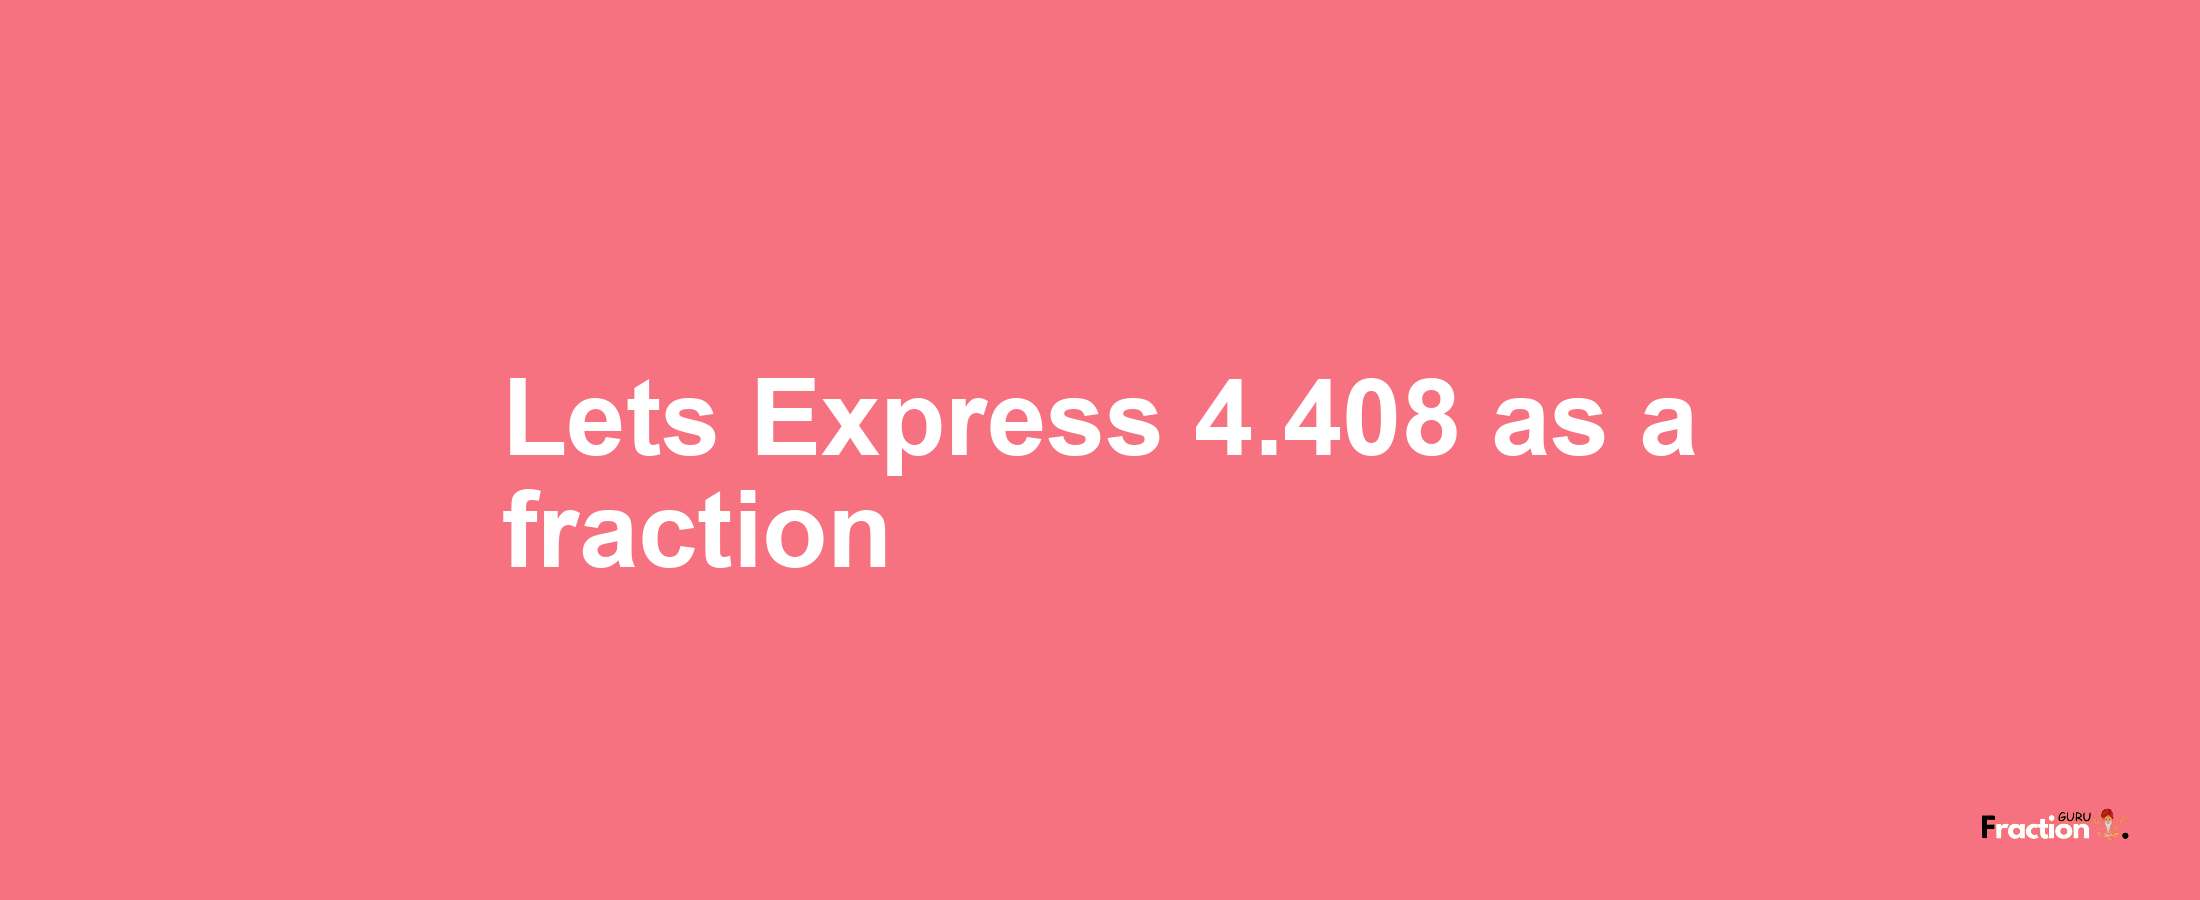 Lets Express 4.408 as afraction